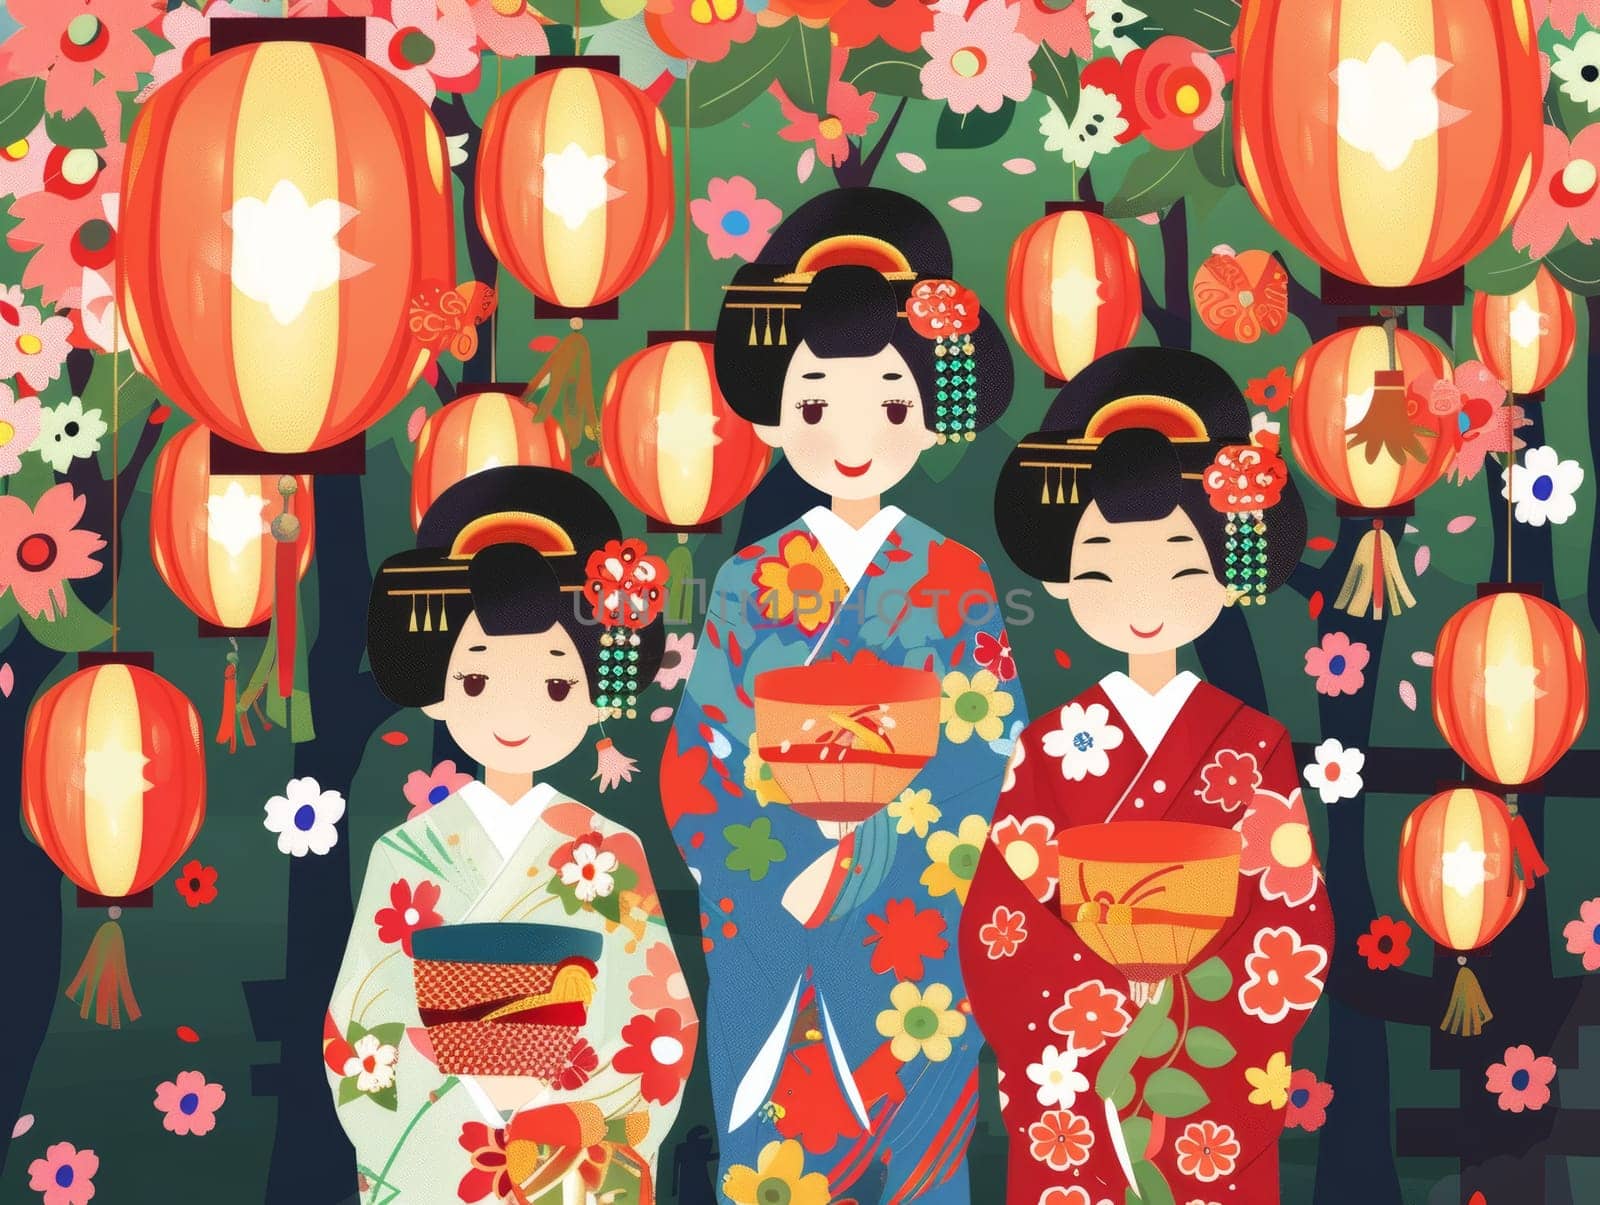 Colorful geisha figures surrounded by blooming flowers, lanterns, and traditional Japanese elements create a lively, festive scene bursting with cultural heritage and charm